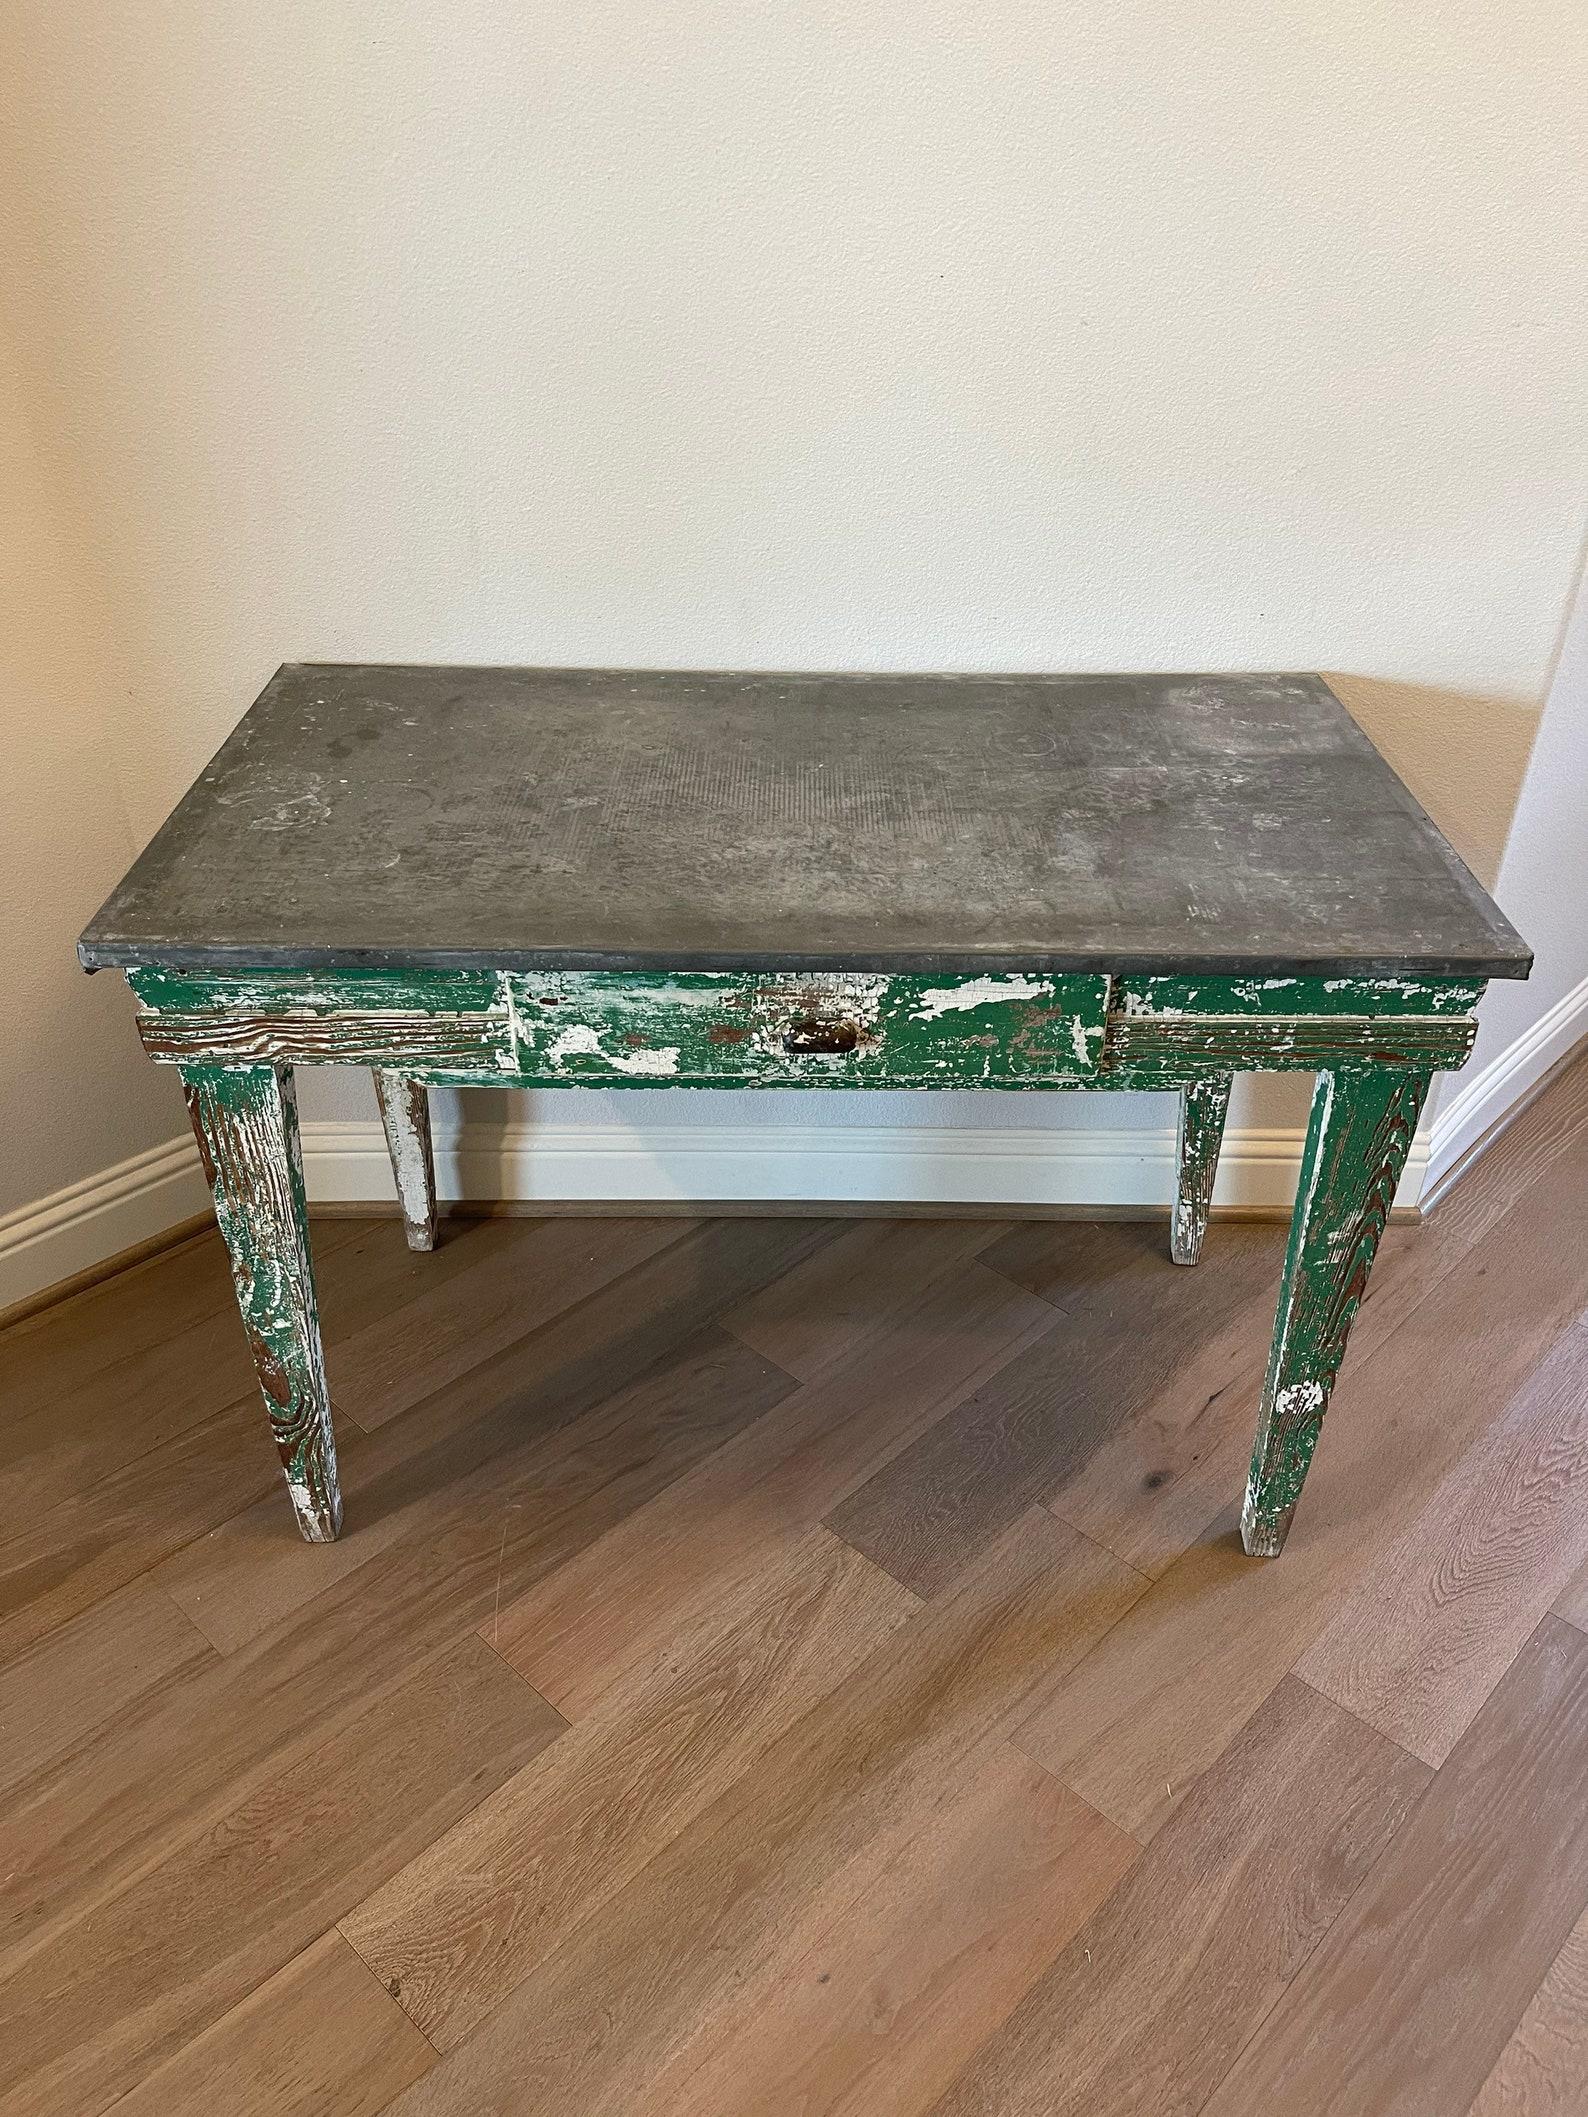 A Scandinavian antique painted wood galvanized metal top work table with beautifully aged distressed chippy paint patina. 

Born in the 19th century, hand-crafted of solid pine wood, classic Gustavian taste - simple angular Parsons table form,